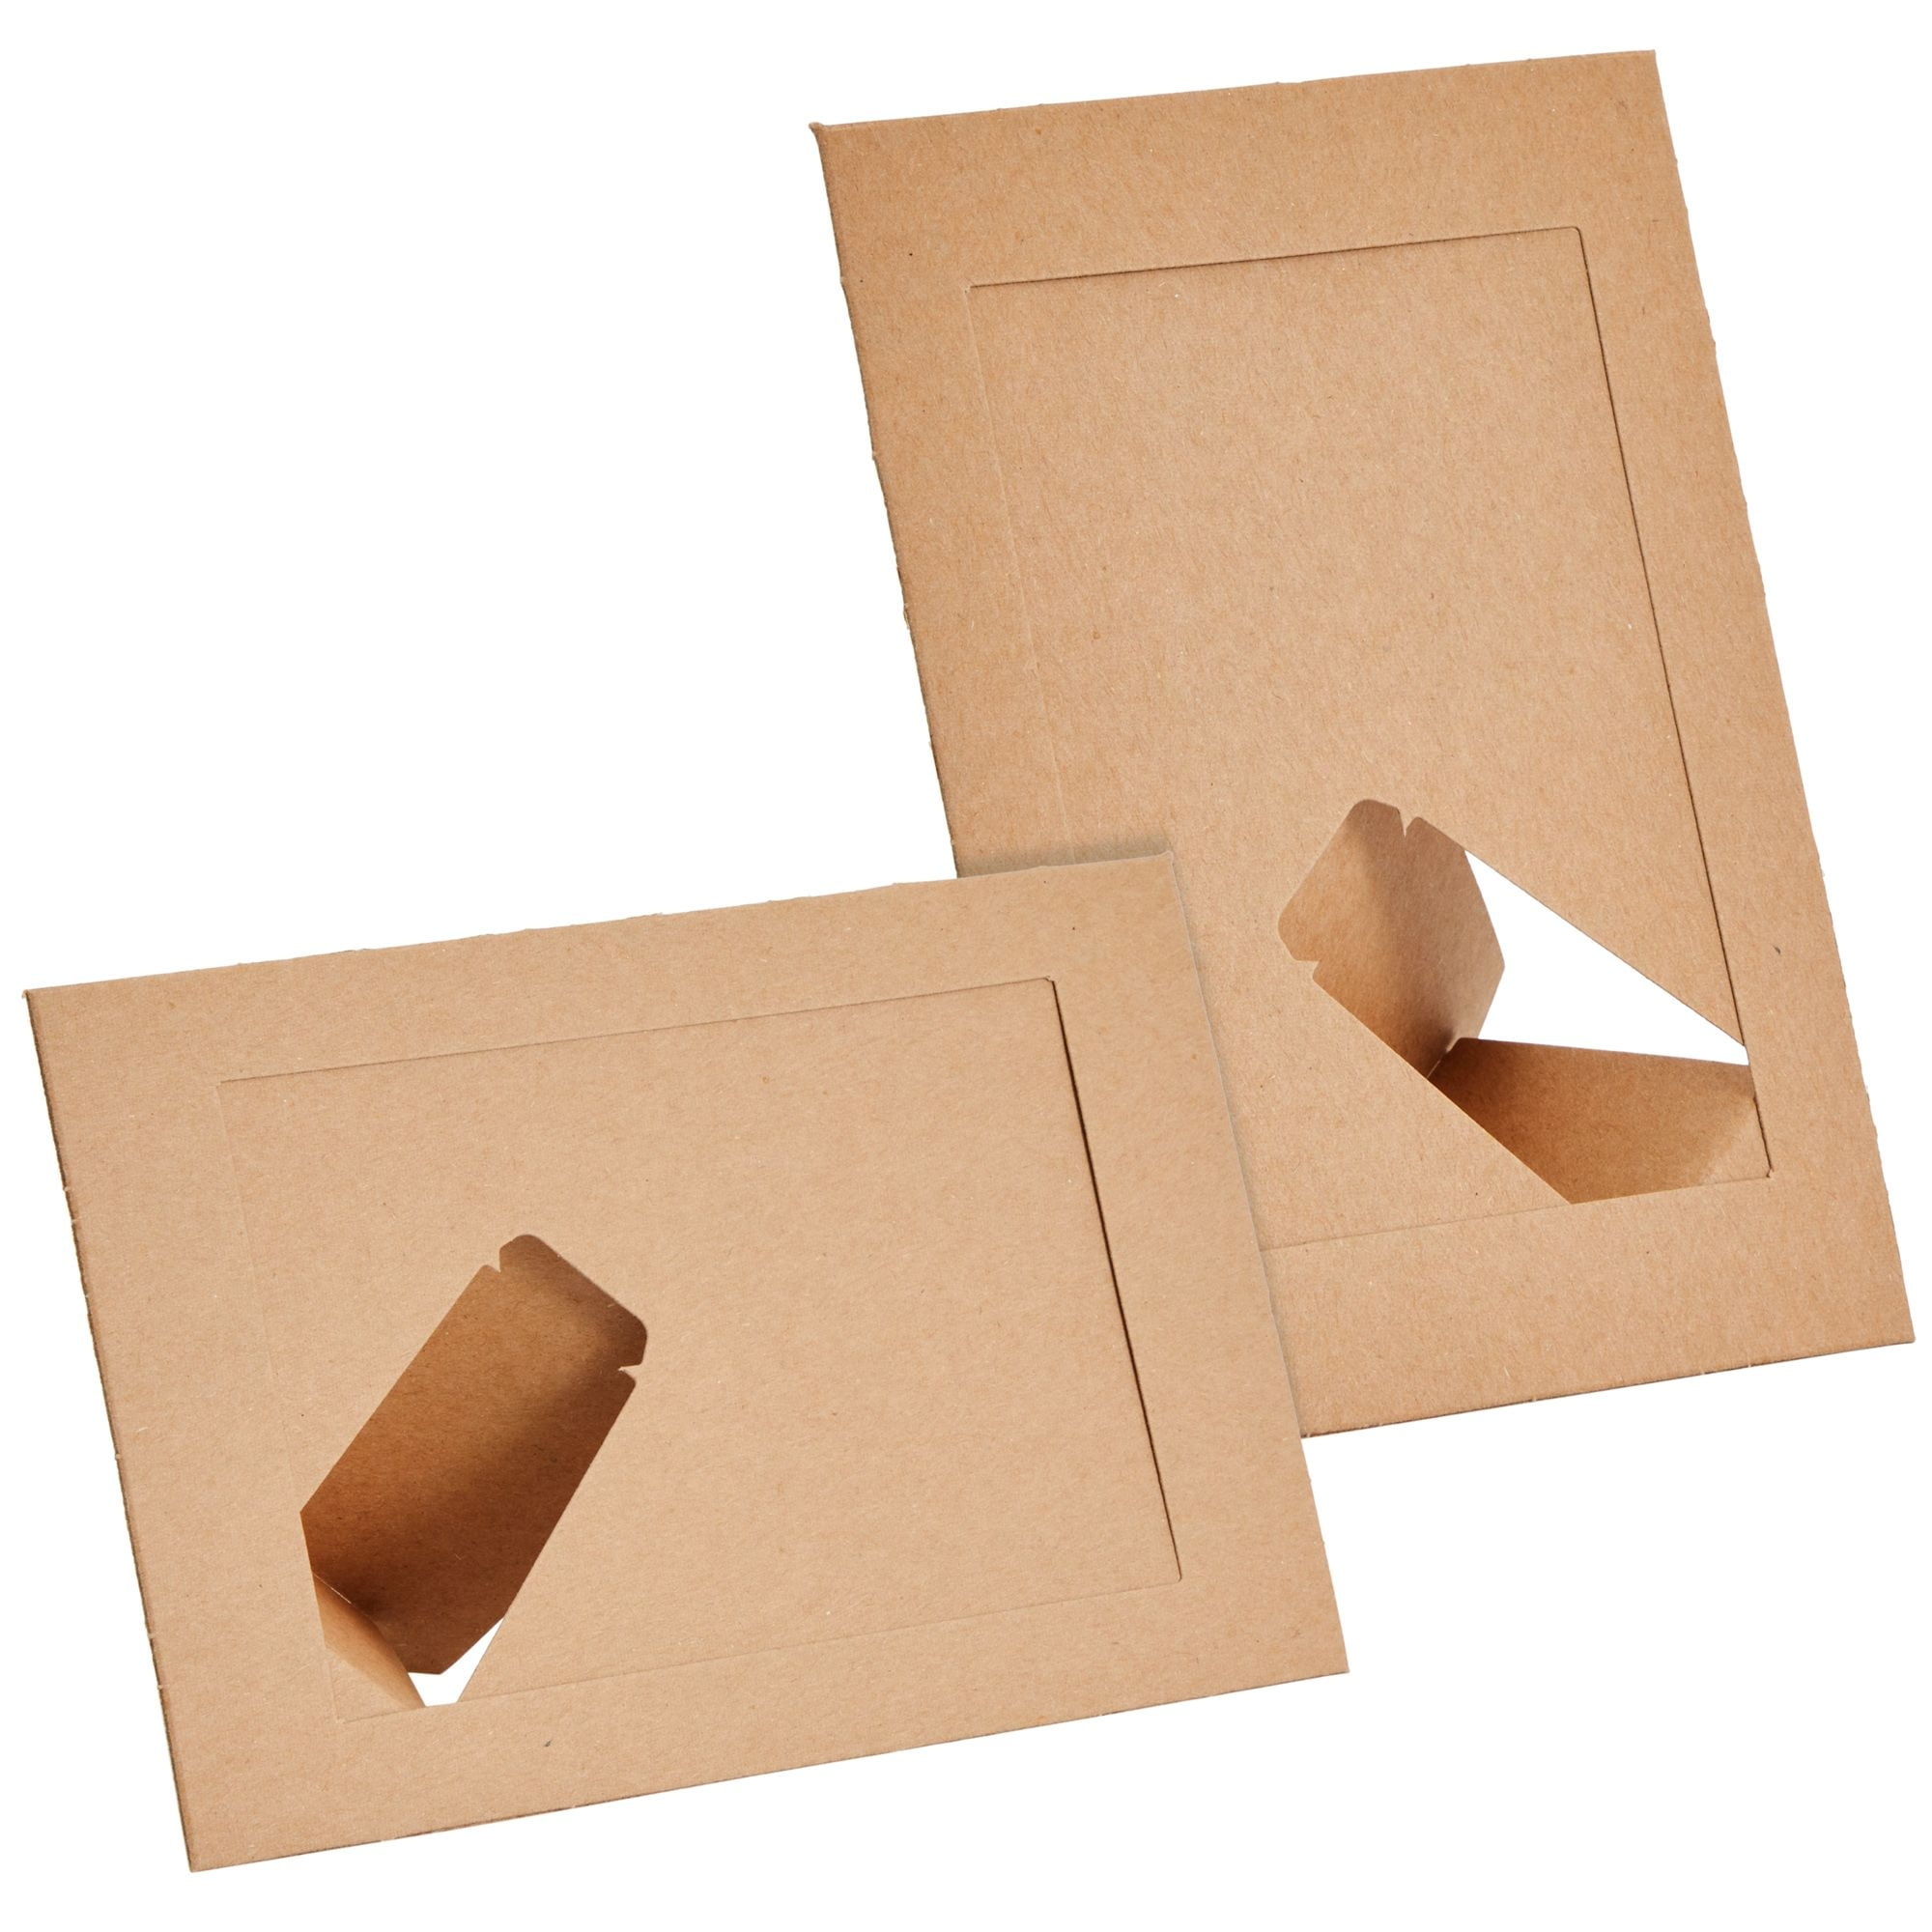 50-Pack Paper Picture Frames 4x6 Easel with Stand, Kraft Paper